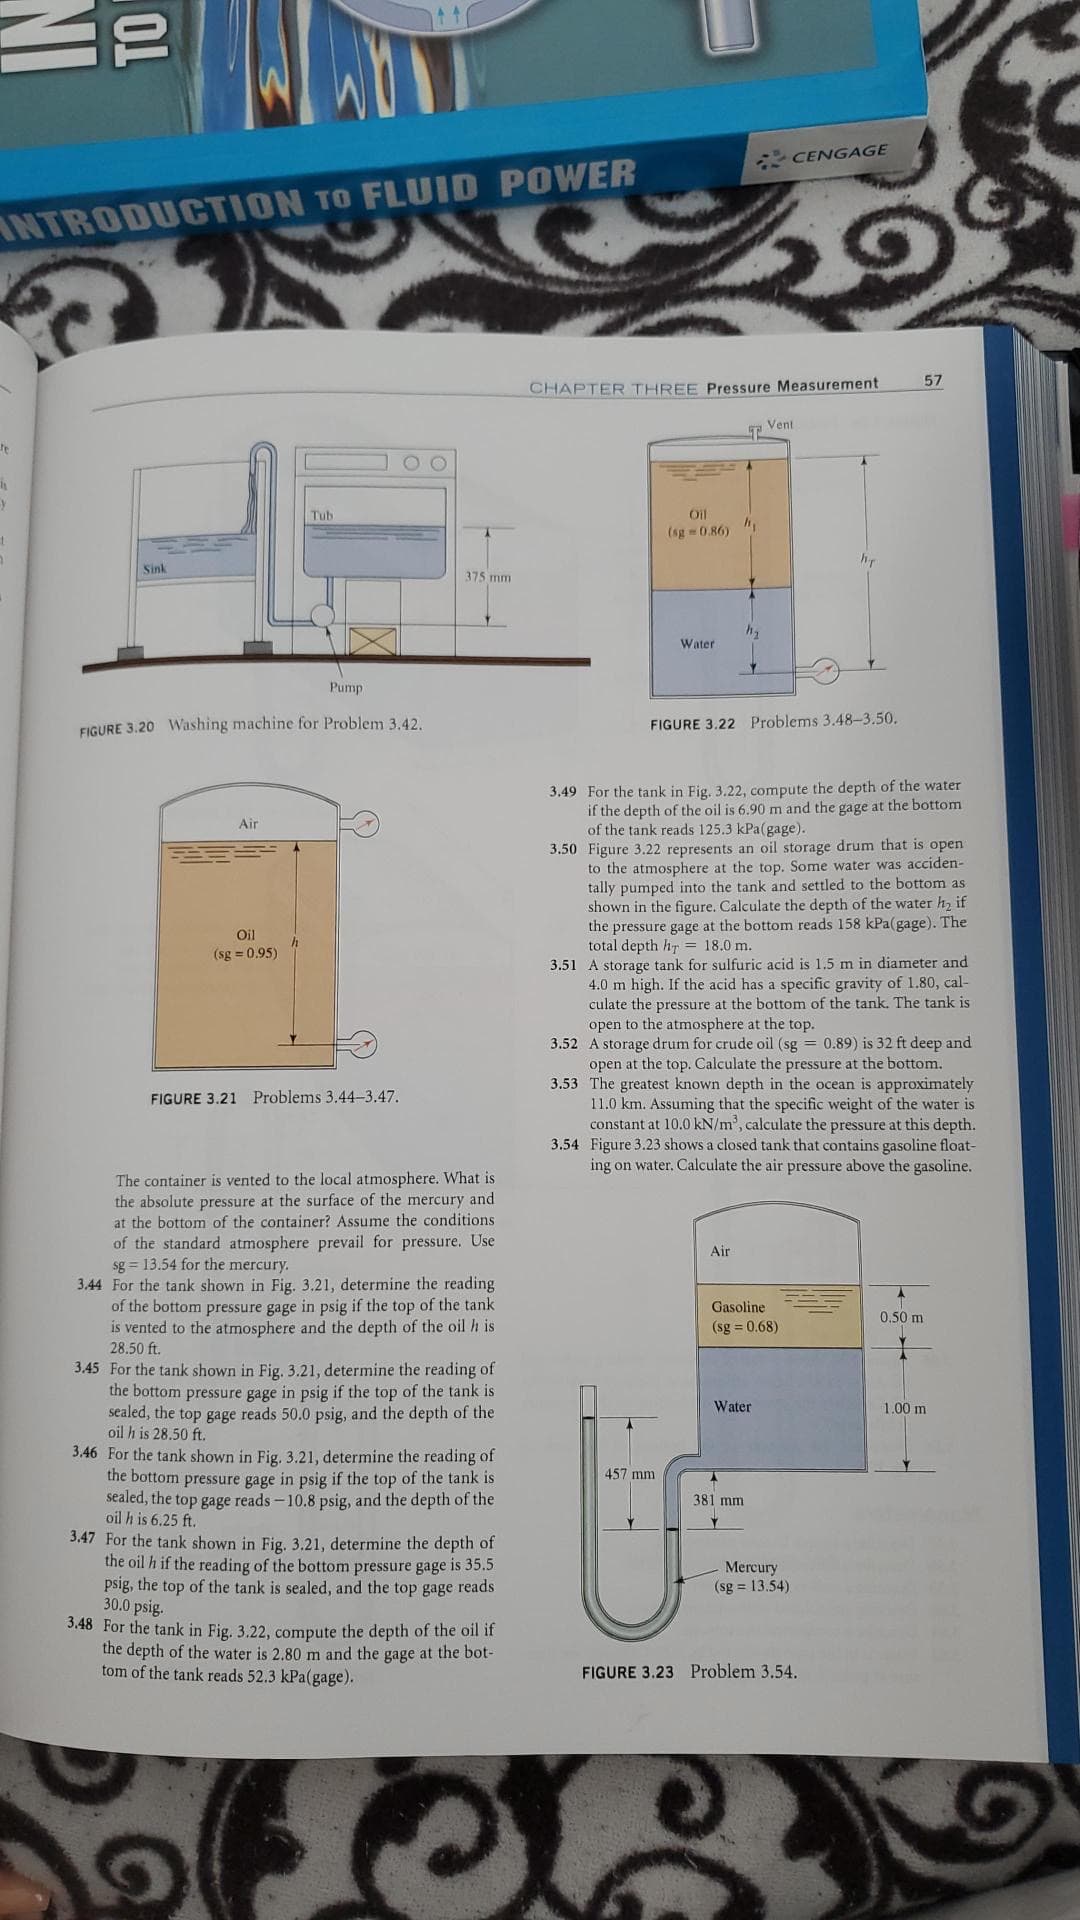 TO
CENGAGE
INTRODUCTION TO FLUID POWER
57
CHAPTER THREE Pressure Measurement
Vent
Tub
Oil
(sg 0.86)
Sink
375 mm
Water
Pump
FIGURE 3.20 Washing machine for Problem 3.42.
FIGURE 3.22 Problems 3.48-3.50.
3.49 For the tank in Fig. 3.22, compute the depth of the water
if the depth of the oil is 6.90 m and the gage at the bottom
of the tank reads 125.3 kPa(gage).
3.50 Figure 3.22 represents an oil storage drum that is open
to the atmosphere at the top. Some water was acciden-
tally pumped into the tank and settled to the bottom as
shown in the figure. Calculate the depth of the water h, if
the pressure gage at the bottom reads 158 kPa(gage). The
total depth hr = 18.0 m.
3.51 A storage tank for sulfuric acid is 1.5 m in diameter and
4.0 m high. If the acid has a specific gravity of 1.80, cal-
culate the pressure at the bottom of the tank. The tank is
open to the atmosphere at the top.
3.52 A storage drum for crude oil (sg = 0.89) is 32 ft deep and
open at the top. Calculate the pressure at the bottom.
3.53 The greatest known depth in the ocean is approximately
11.0 km. Assuming that the specific weight of the water is
constant at 10.0 kN/m', calculate the pressure at this depth.
3.54 Figure 3.23 shows a closed tank that contains gasoline float-
ing on water. Calculate the air pressure above the gasoline.
Air
Oil
(sg = 0.95)
FIGURE 3.21 Problems 3.44-3.47.
The container is vented to the local atmosphere. What is
the absolute pressure at the surface of the mercury and
at the bottom of the container? Assume the conditions
of the standard atmosphere prevail for pressure. Use
sg = 13.54 for the mercury.
3.44 For the tank shown in
Air
3.21, determine the reading
of the bottom pressure gage in psig if the top of the tank
is vented to the atmosphere and the depth of the oil h is
28.50 ft.
Gasoline
0.50 m
(sg = 0.68)
3.45 For the tank shown in Fig. 3.21, determine the reading of
the bottom pressure gage in psig if the top of the tank is
sealed, the top gage reads 50.0 psig, and the depth of the
oil h is 28.50 ft.
3.46 For the tank shown in Fig. 3.21, determine the reading of
the bottom pressure gage in psig if the top of the tank is
sealed, the top gage reads -10.8 psig, and the depth of the
oil h is 6.25 ft.
Water
1.00 m
457mm
381 mm
3.47 For the tank shown in Fig. 3.21, determine the depth of
the oil h if the reading of the bottom pressure gage is 35.5
psig, the top of the tank is sealed, and the top gage reads
30.0 psig.
3.48 For the tank in Fig. 3.22, compute the depth of the oil if
the depth of the water is 2.80 m and the gage at the bot-
tom of the tank reads 52.3 kPa(gage).
Mercury
(sg = 13.54)
FIGURE 3.23 Problem 3.54.
